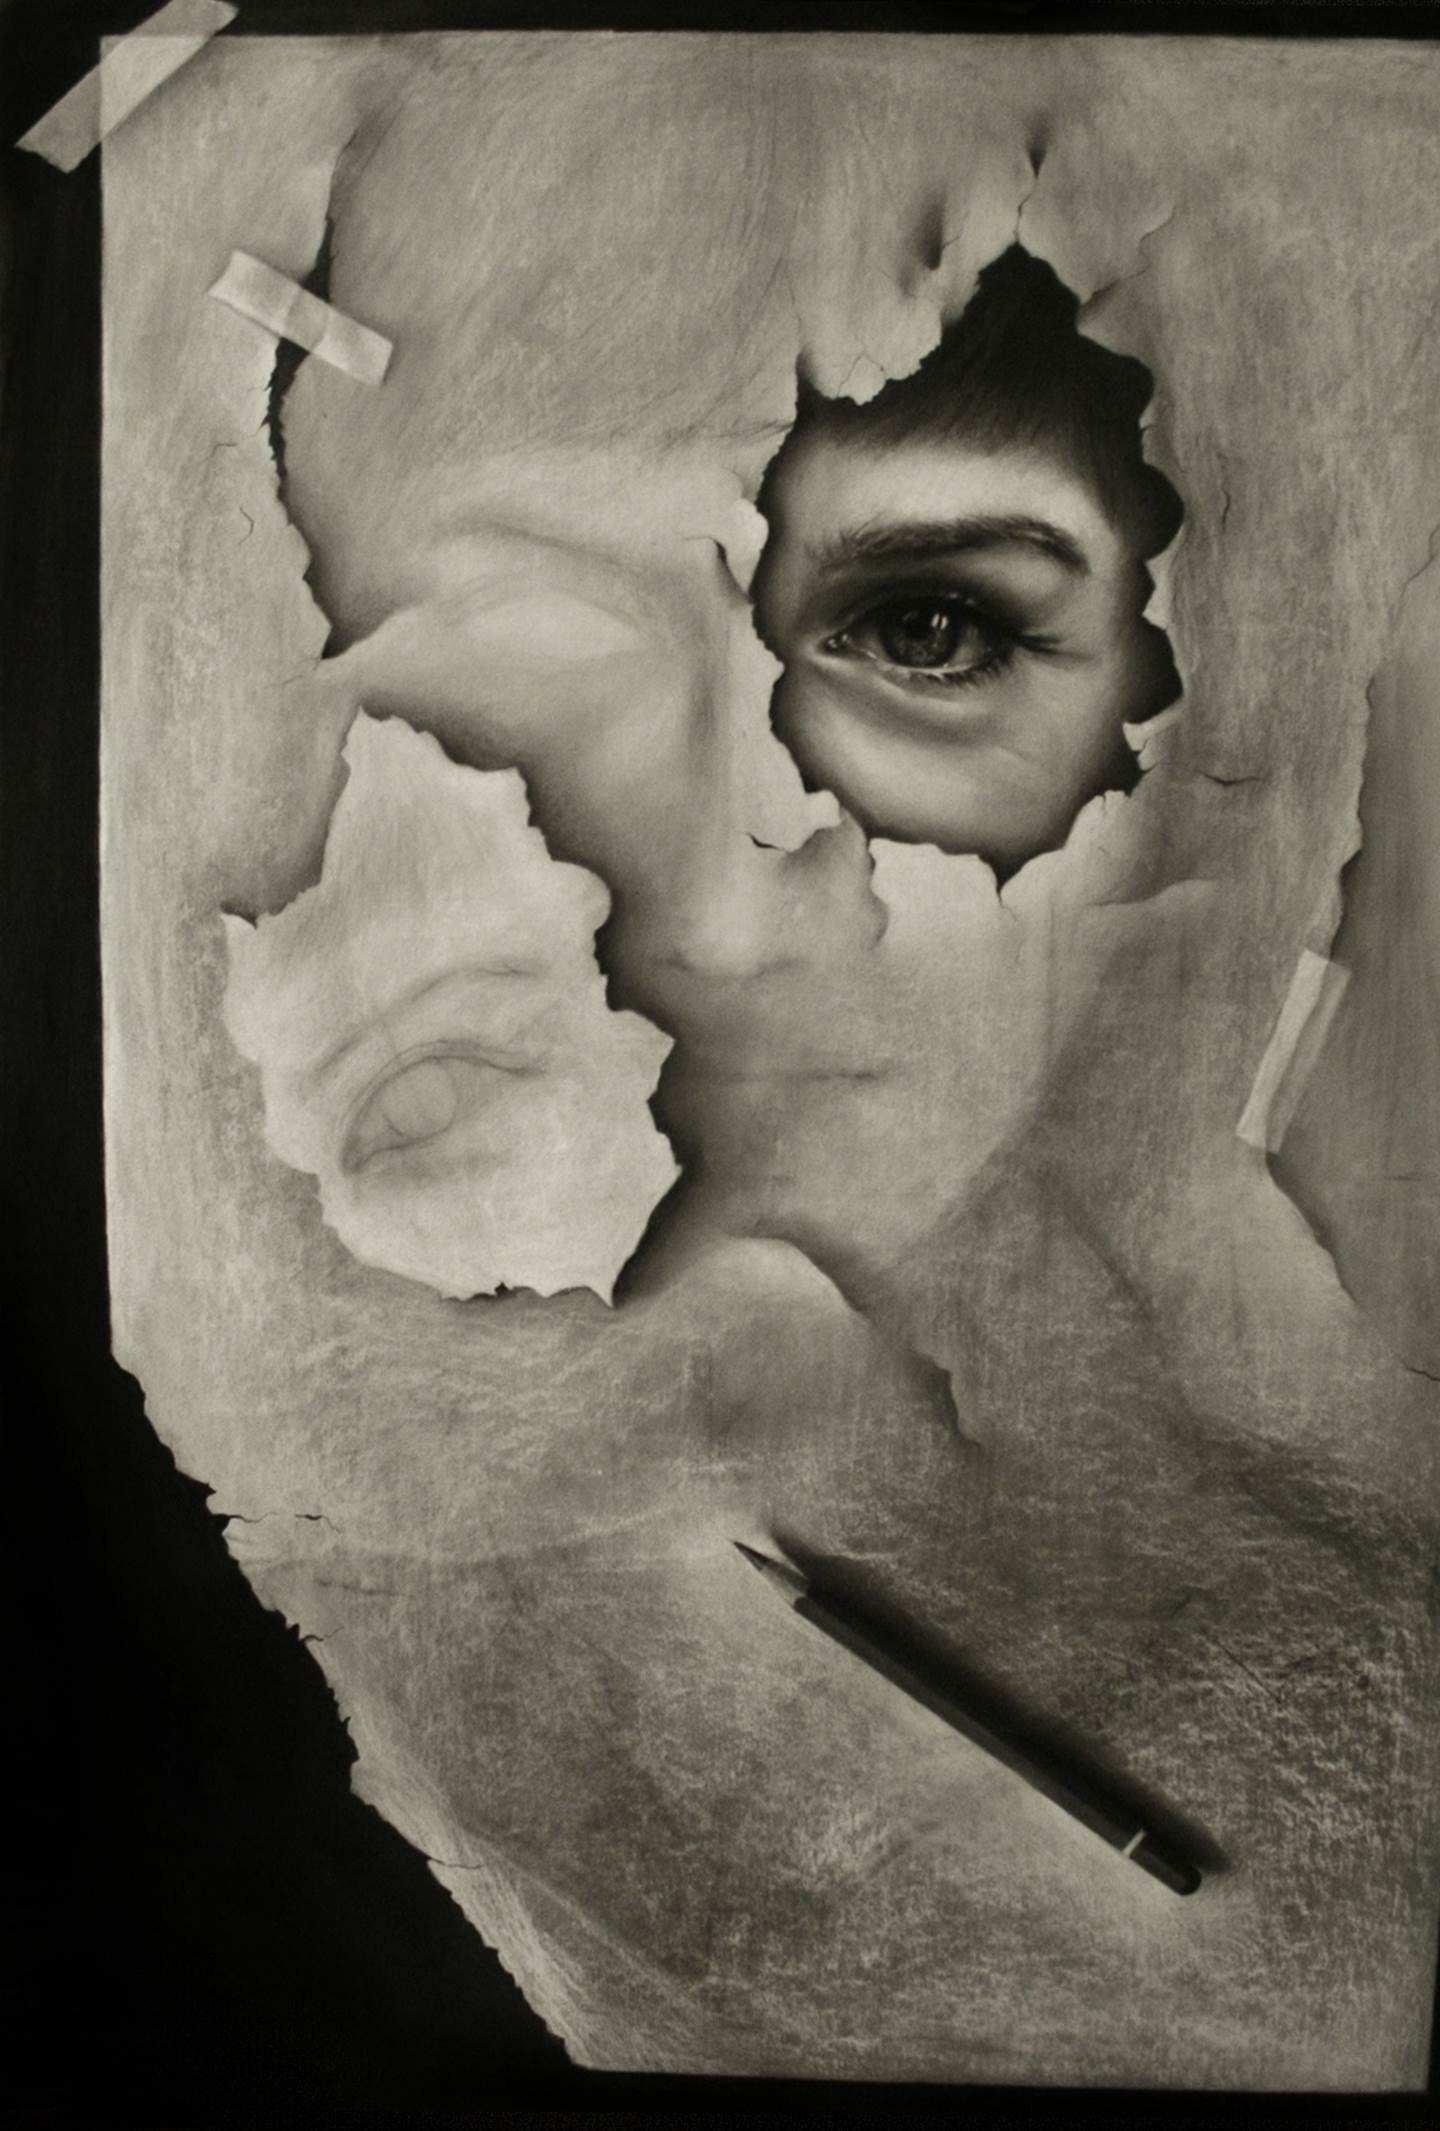 Surreal, original Portrait Charcoal Drawing and Illustration by Cris DK